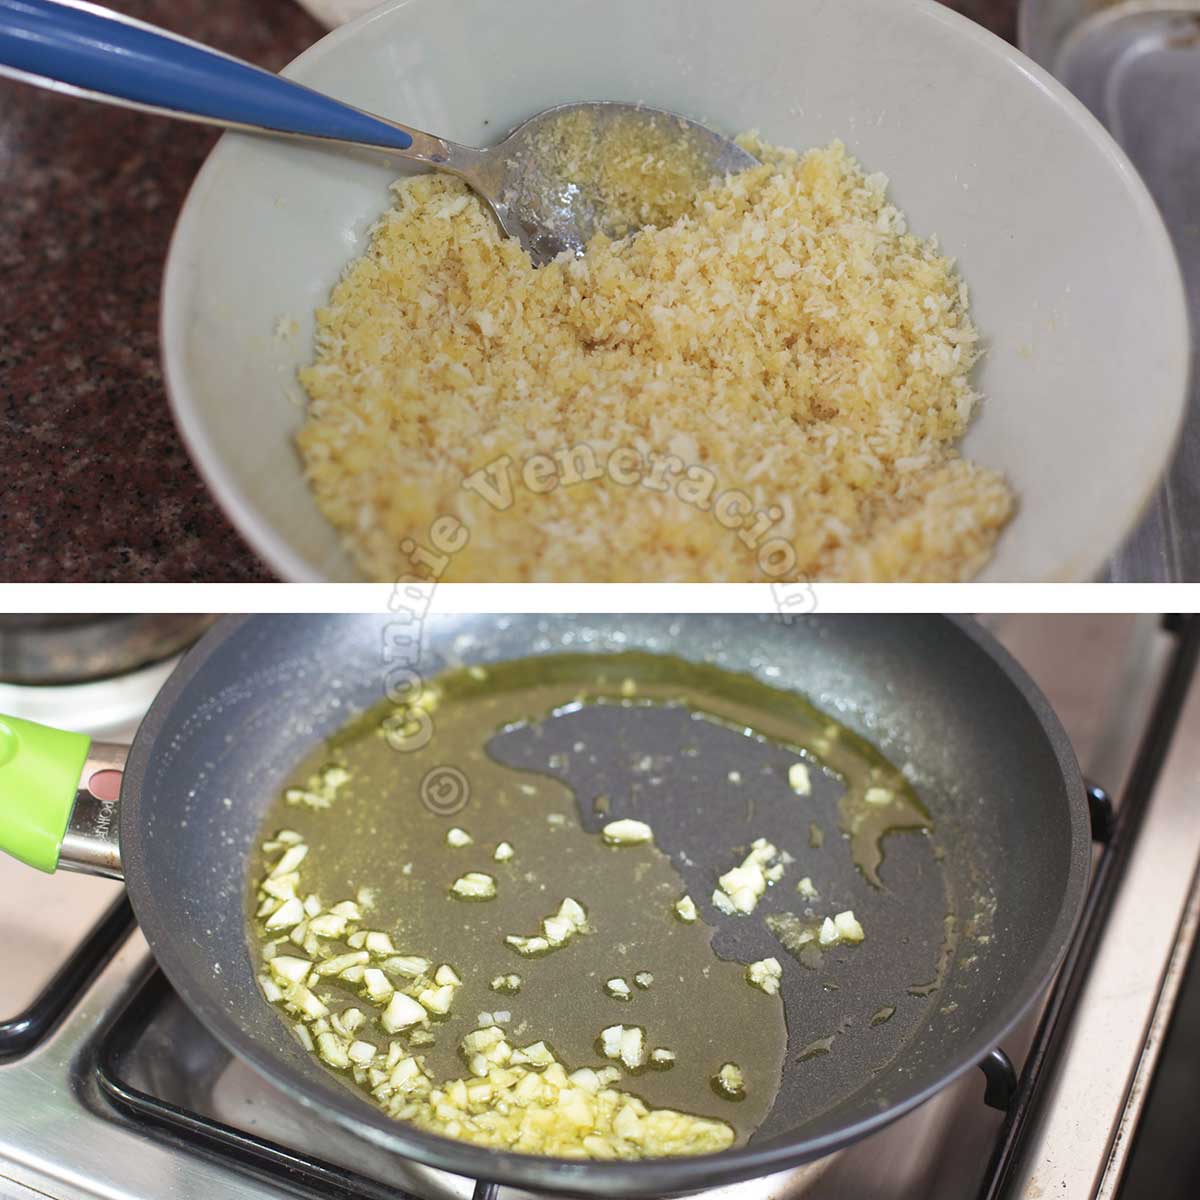 Mixing panko with Parmesan / sauteeing garlic in butter